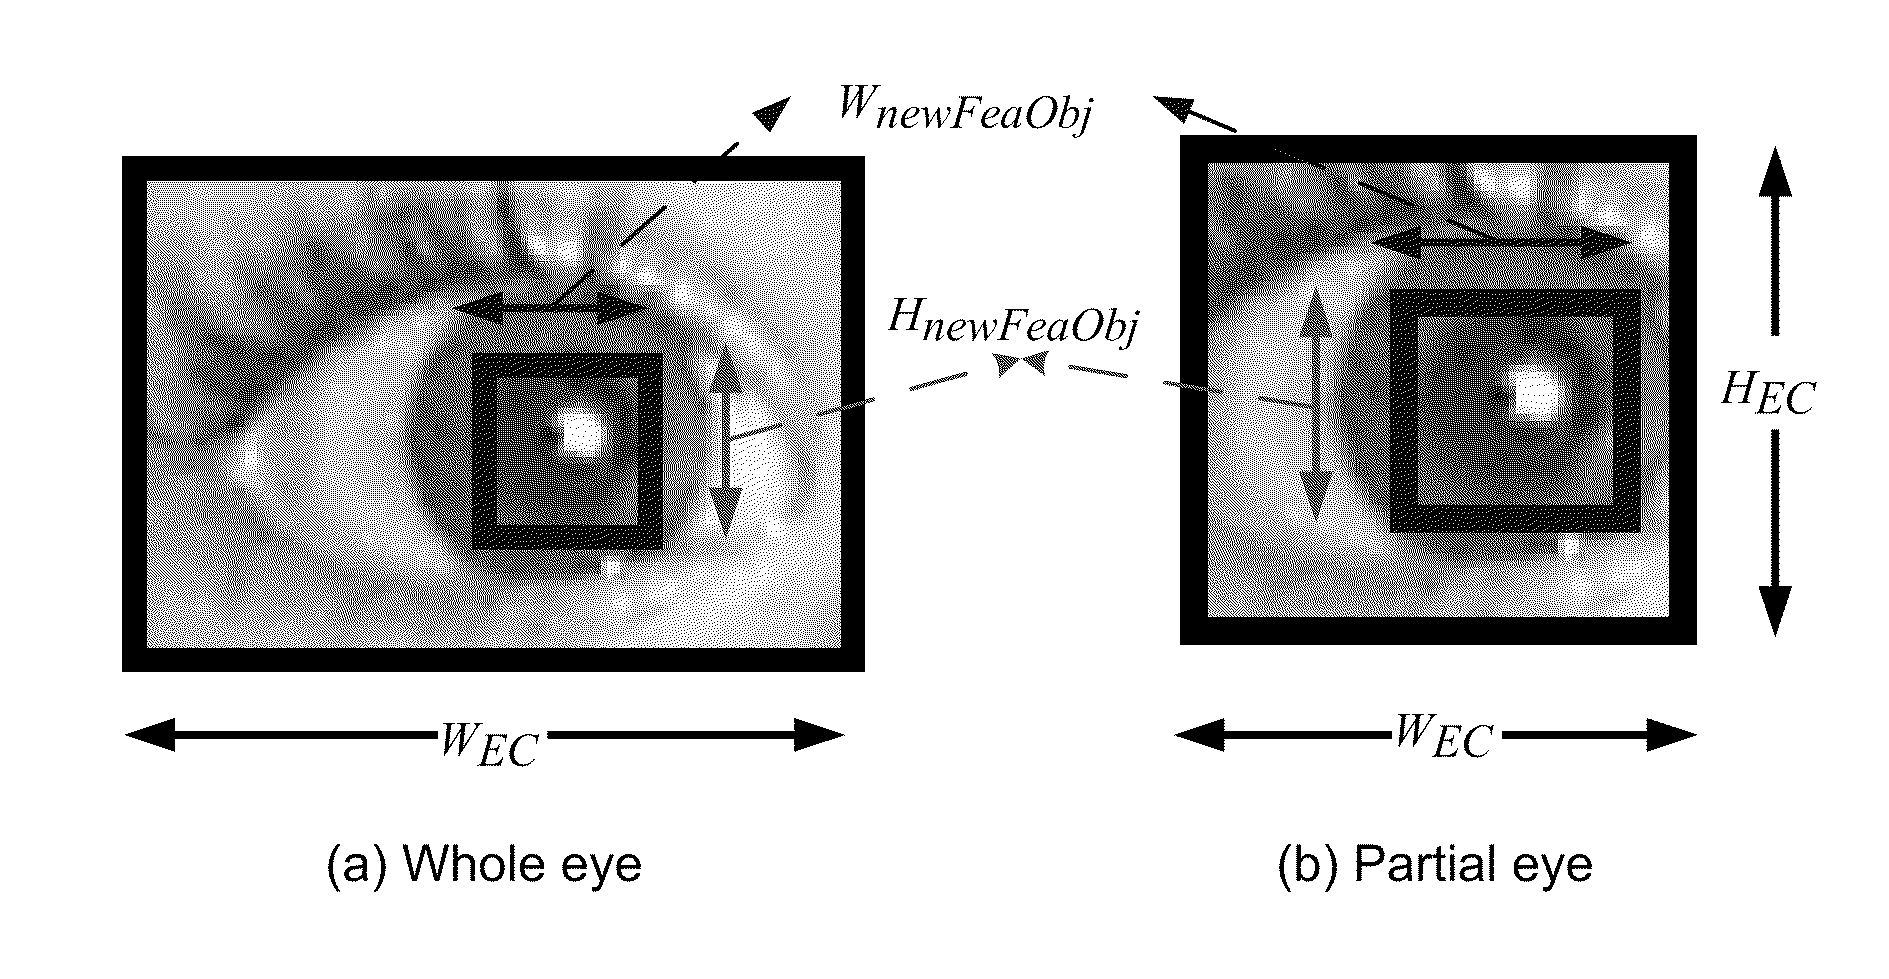 Mouth removal method for red-eye detection and correction